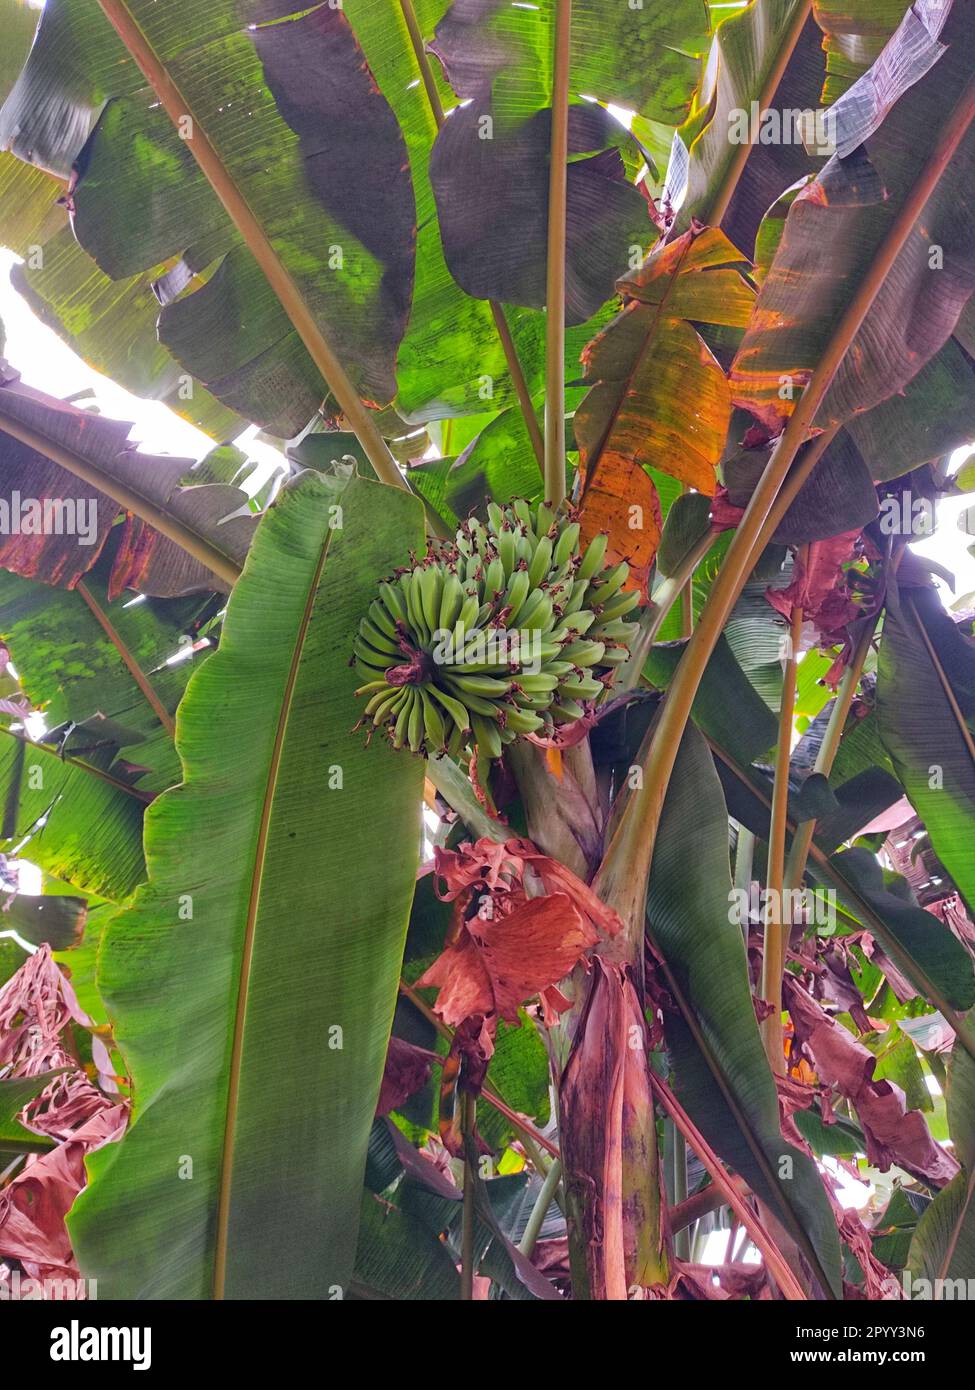 A vibrant close-up view of a cluster of lush green bananas ripening on a tree branch in a tropical setting Stock Photo